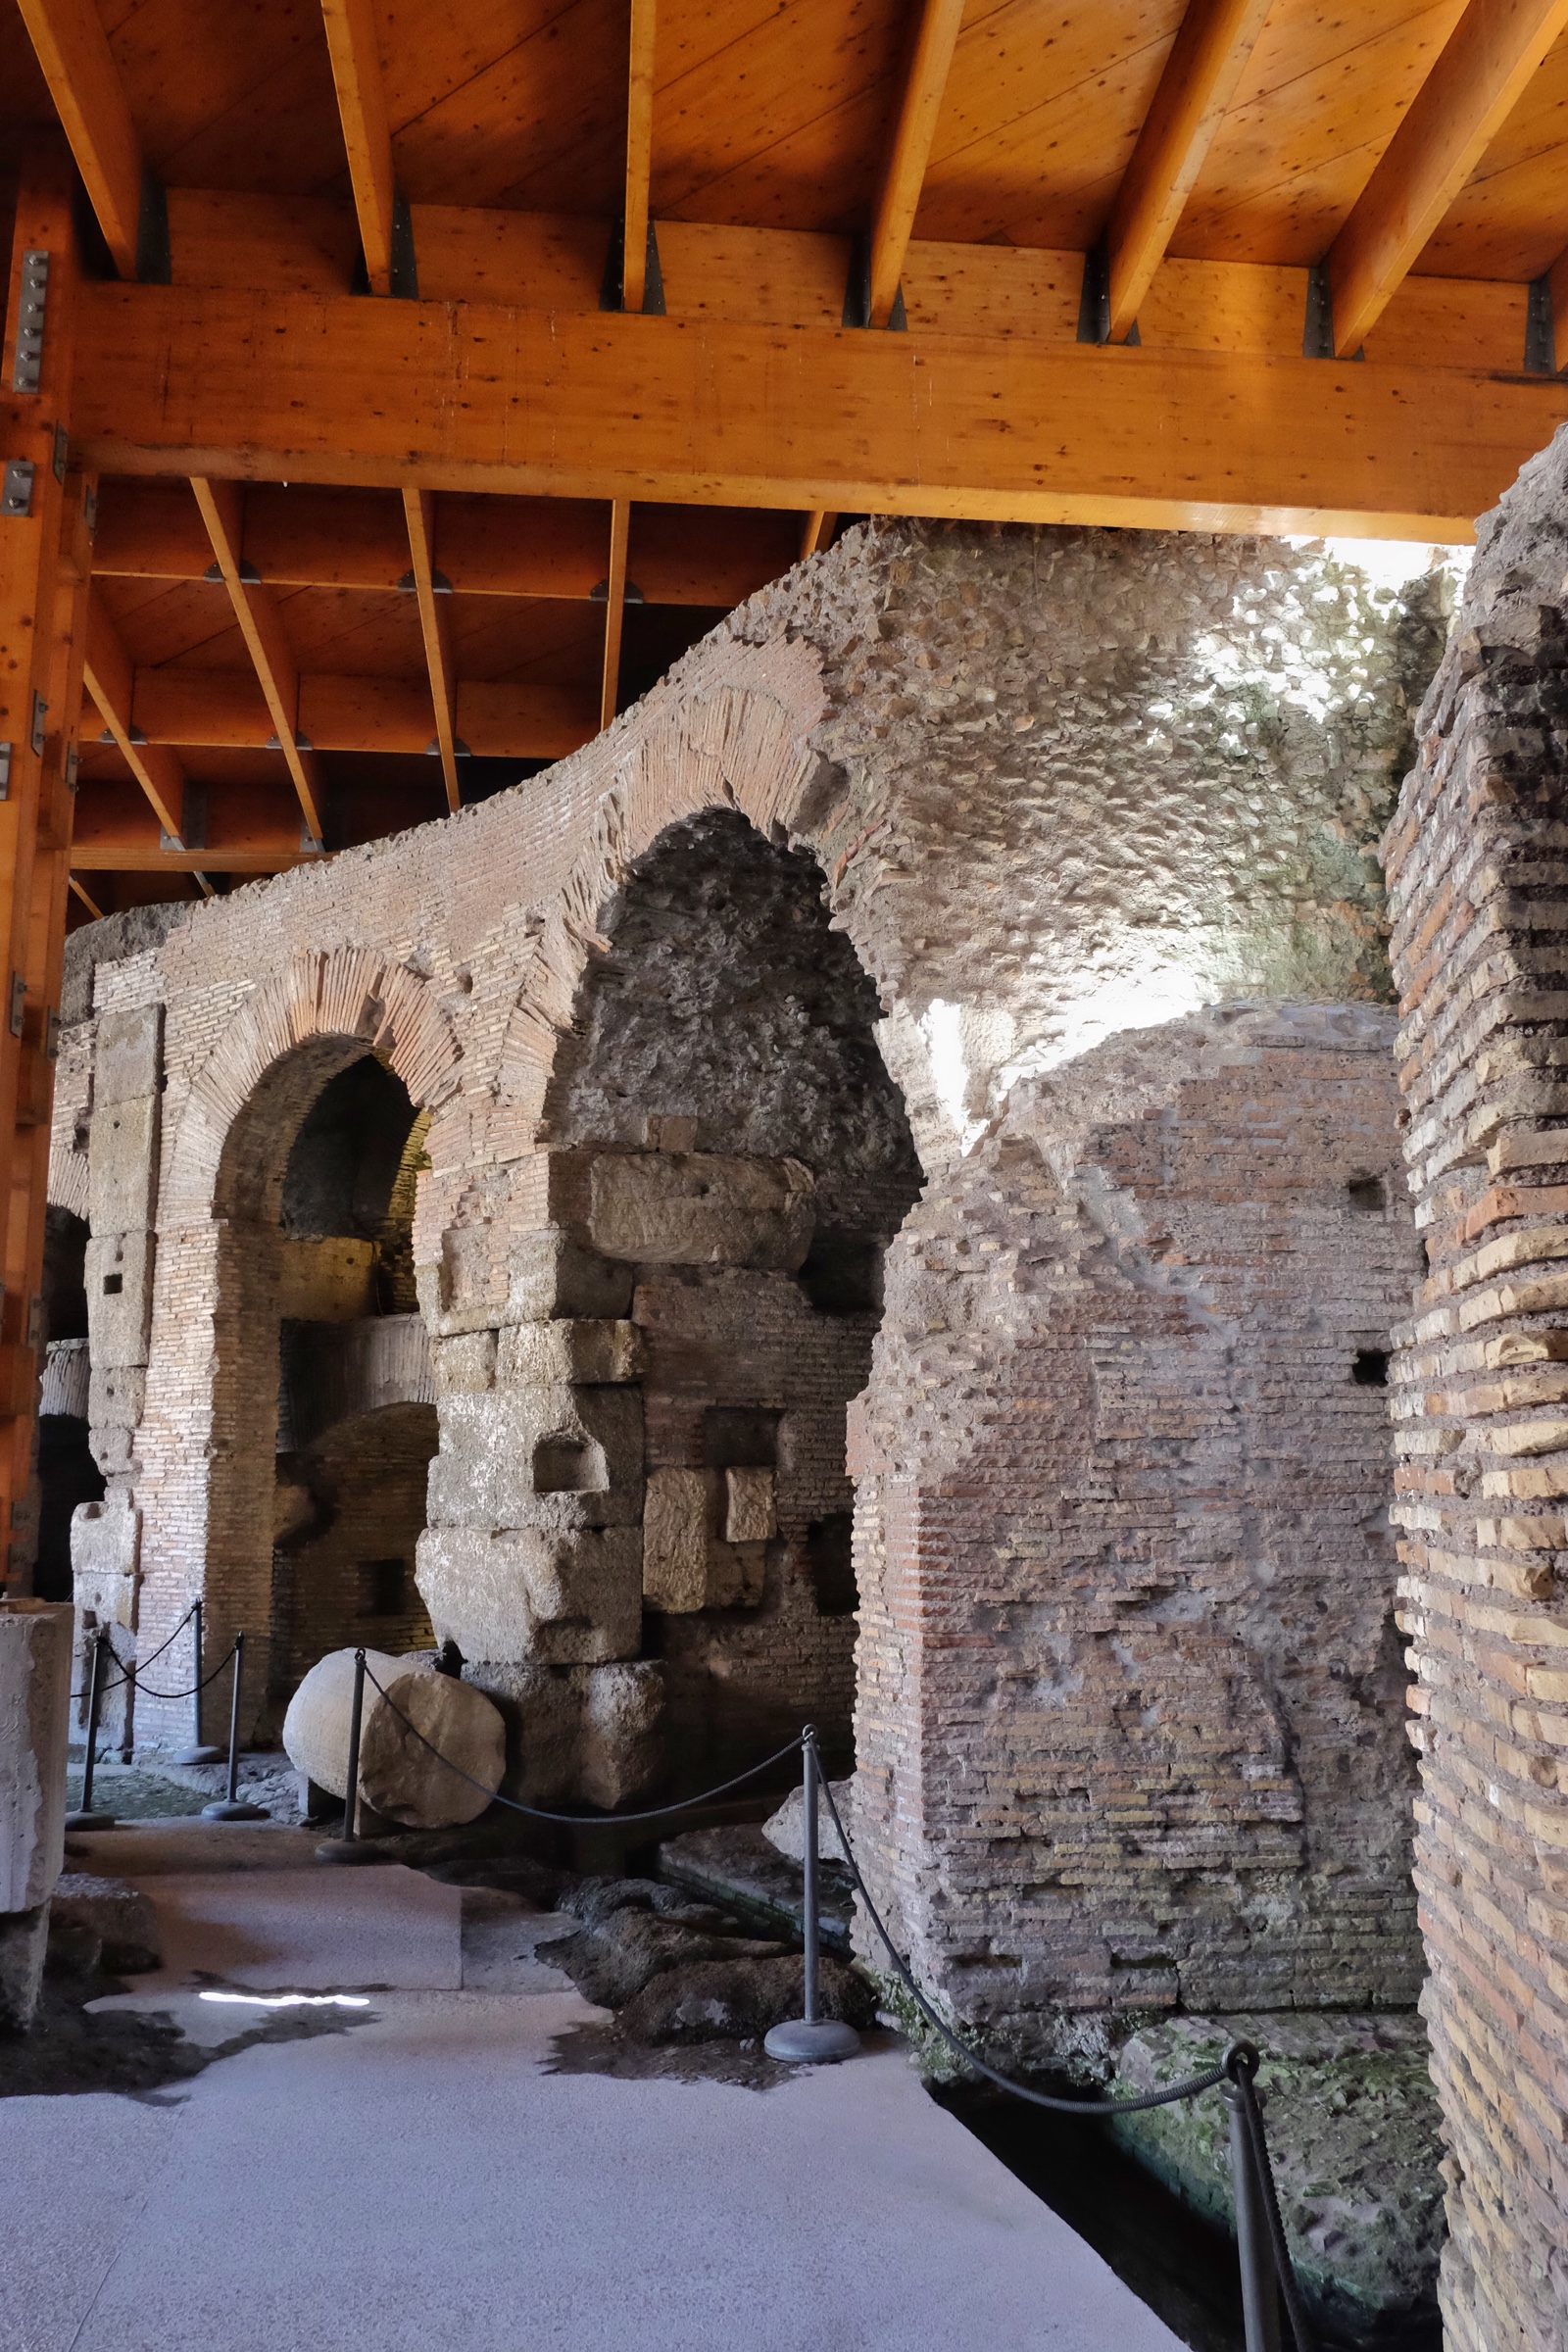 The alcoves under the Colosseum floor where animals would be held.